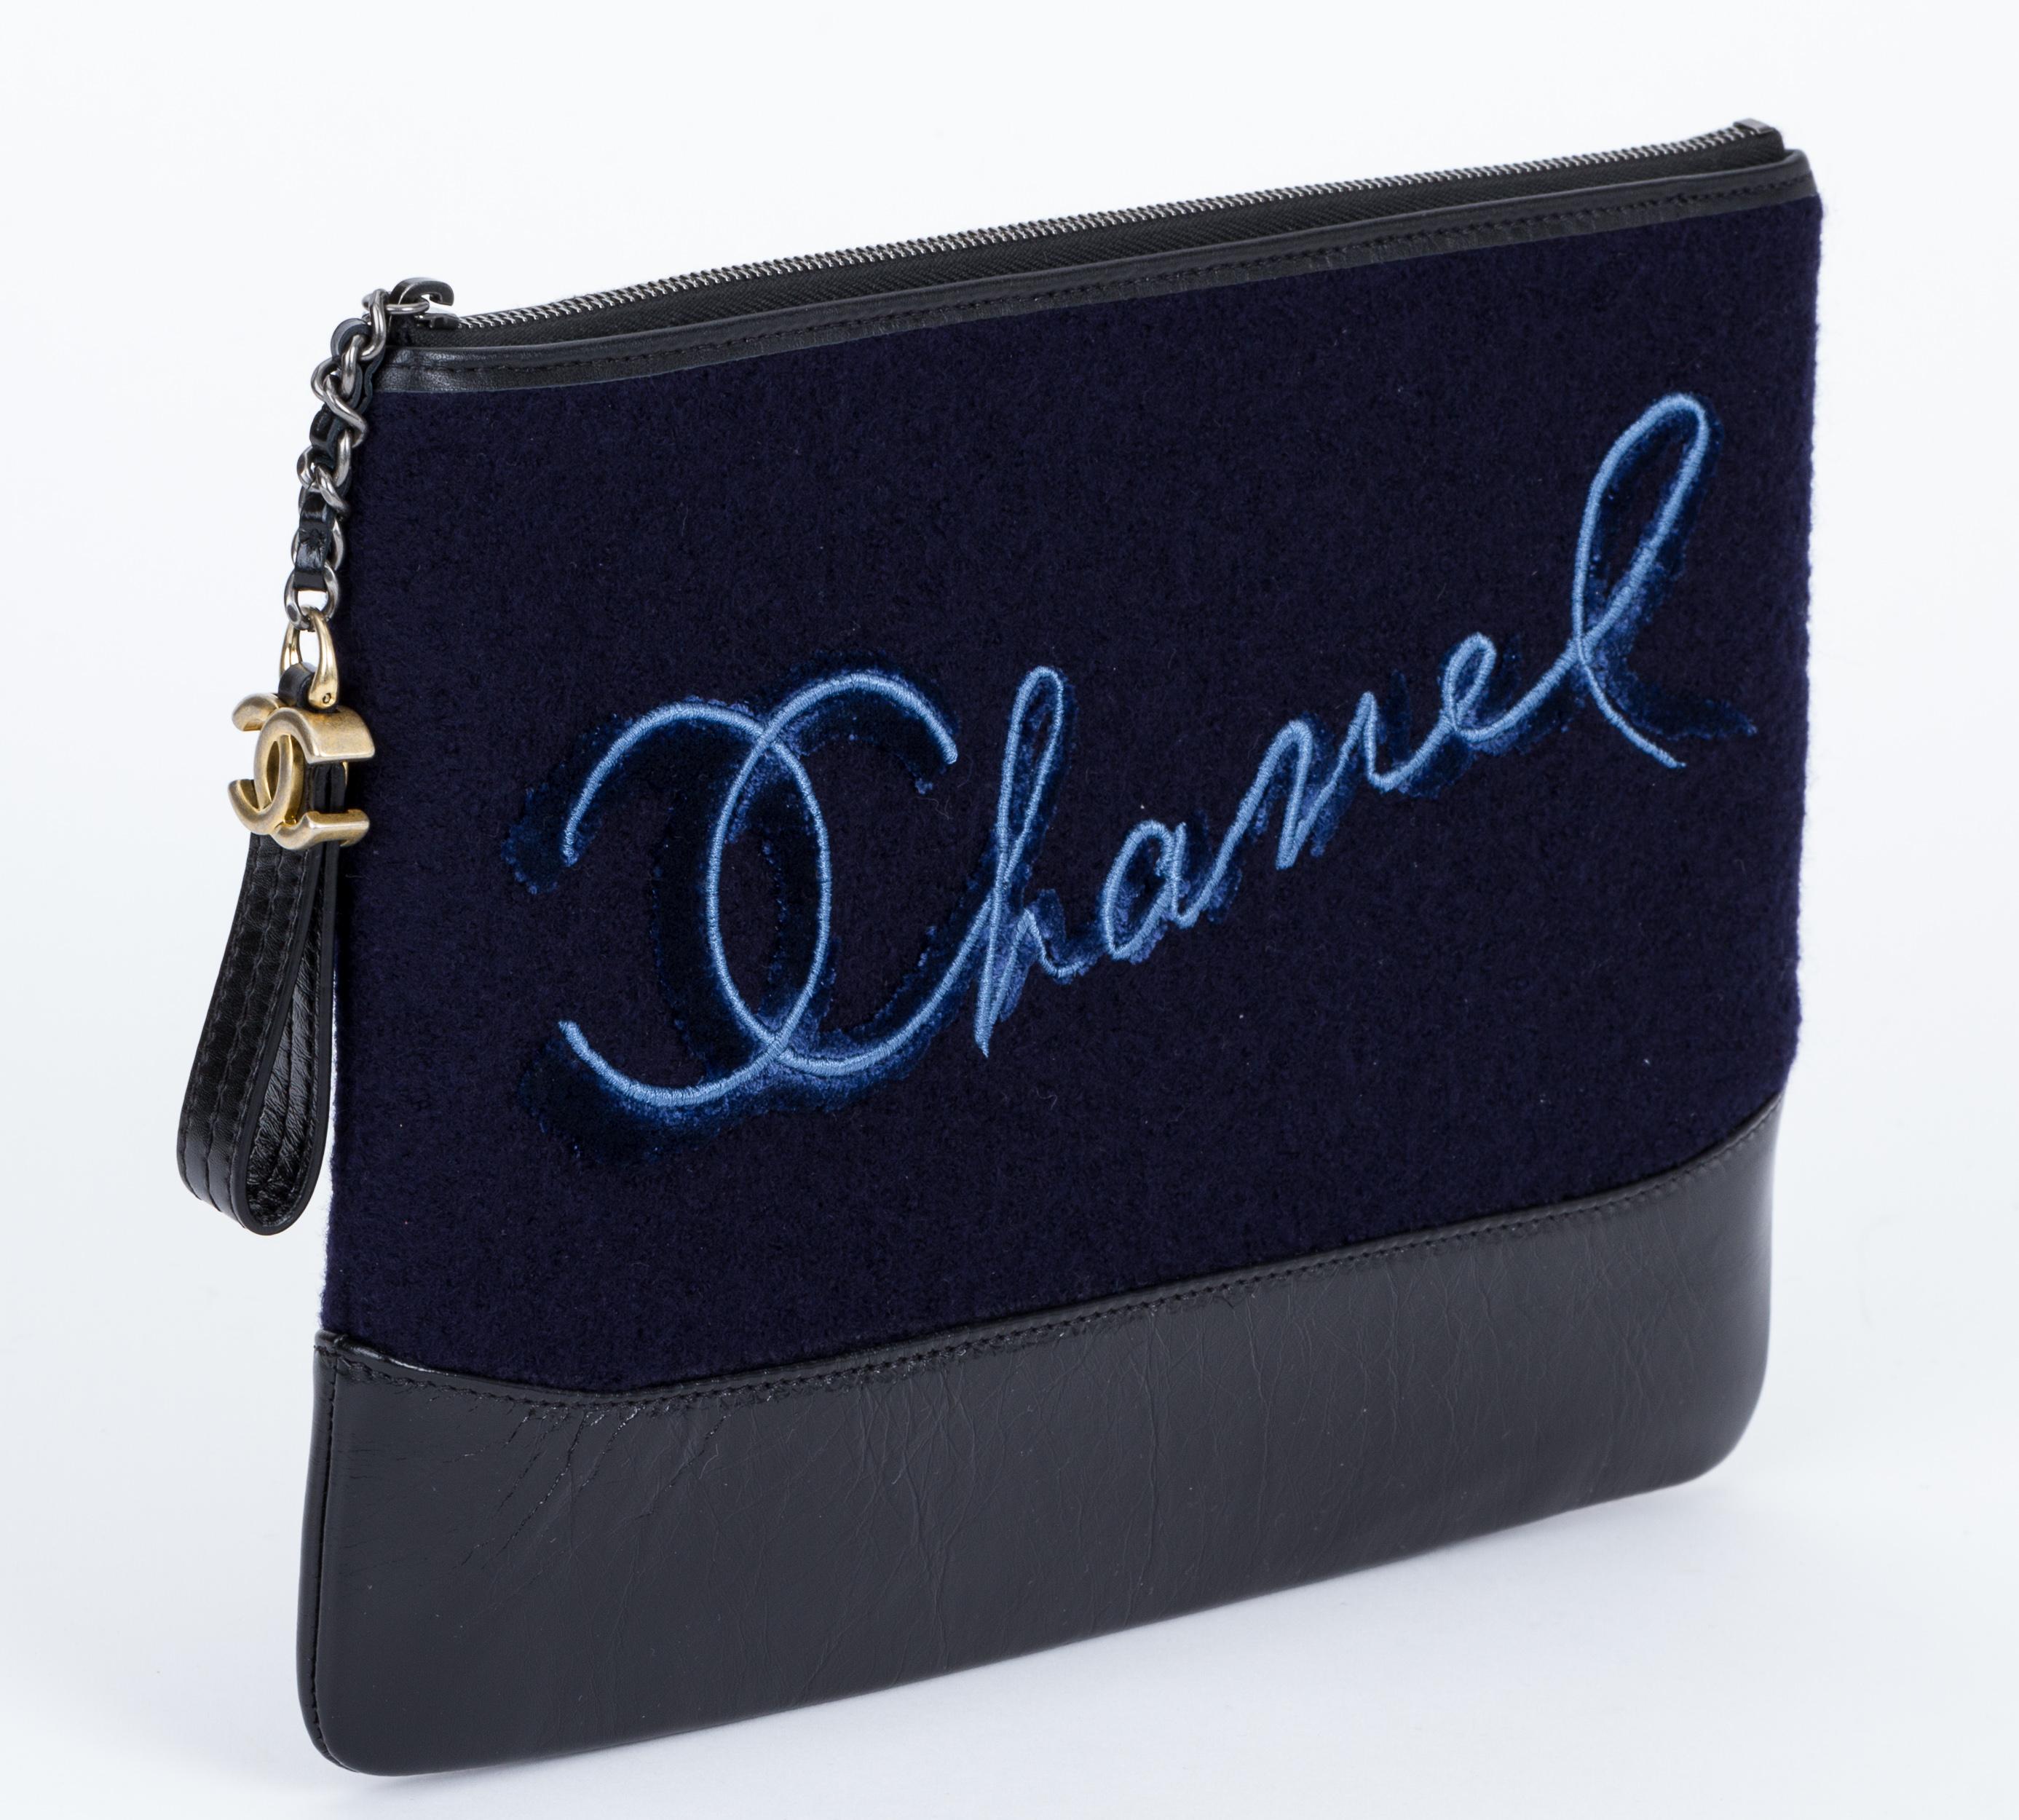 Chanel brand new in box navy blue and black Paris Salzburg clutch. Leather and felt accent. Comes with hologram, id card, booklet, dust cover, camellia, ribbon and box.